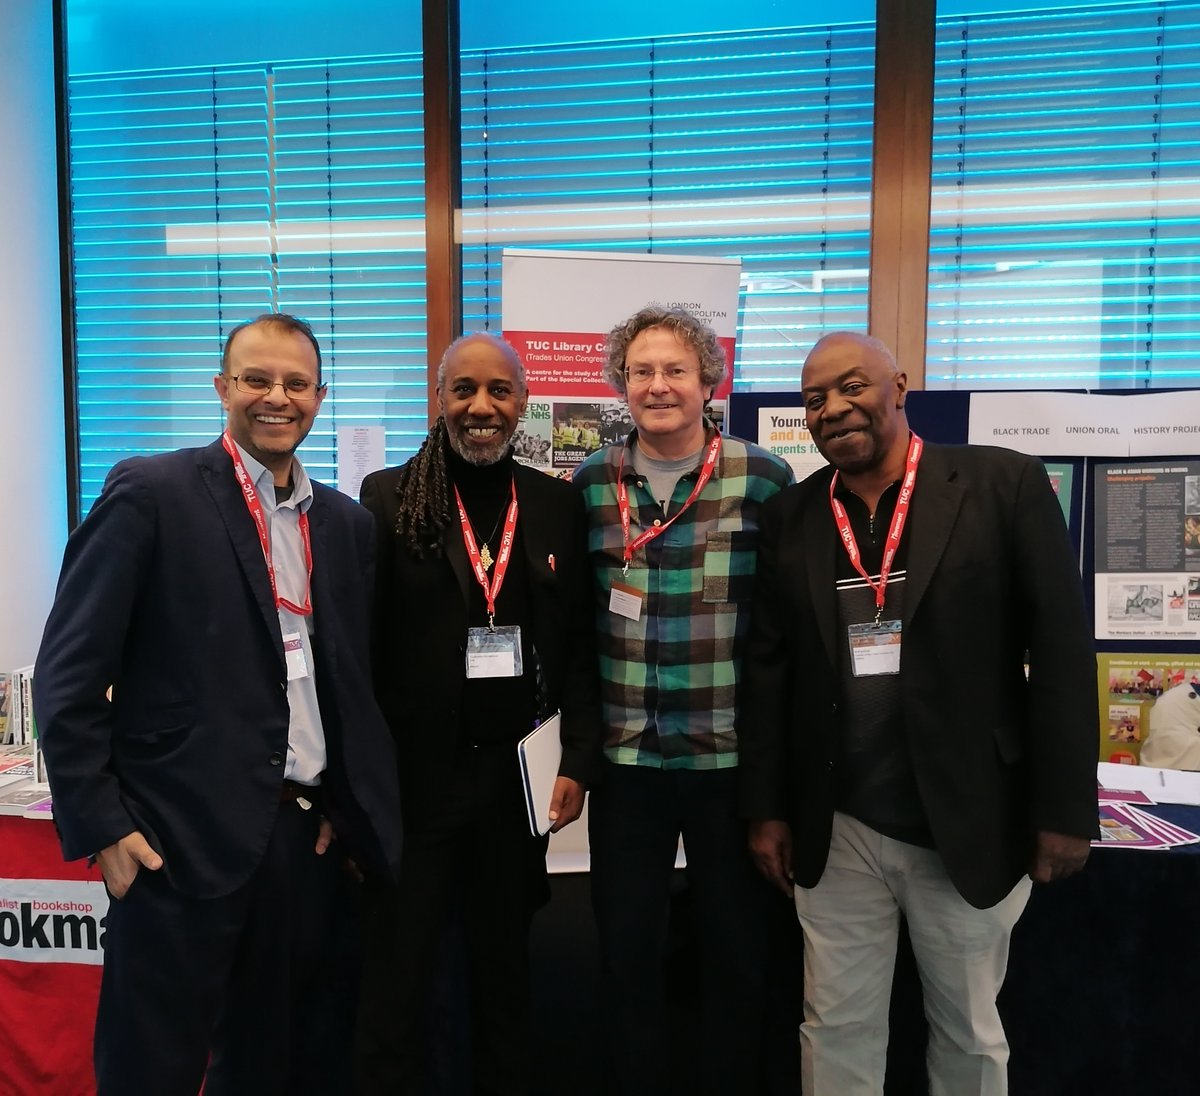 On our stall at @The_TUC Black Workers’ Conference with Wilf Sullivan (right) Ty Nosakhere @RaceGmb (middle) and @LondonMetUni alumni and @UsdawUnion activist Hadi Naqui Looking for participants for our Black Trade Union Oral History Project #HereToStayHereToFight @TUCEquality